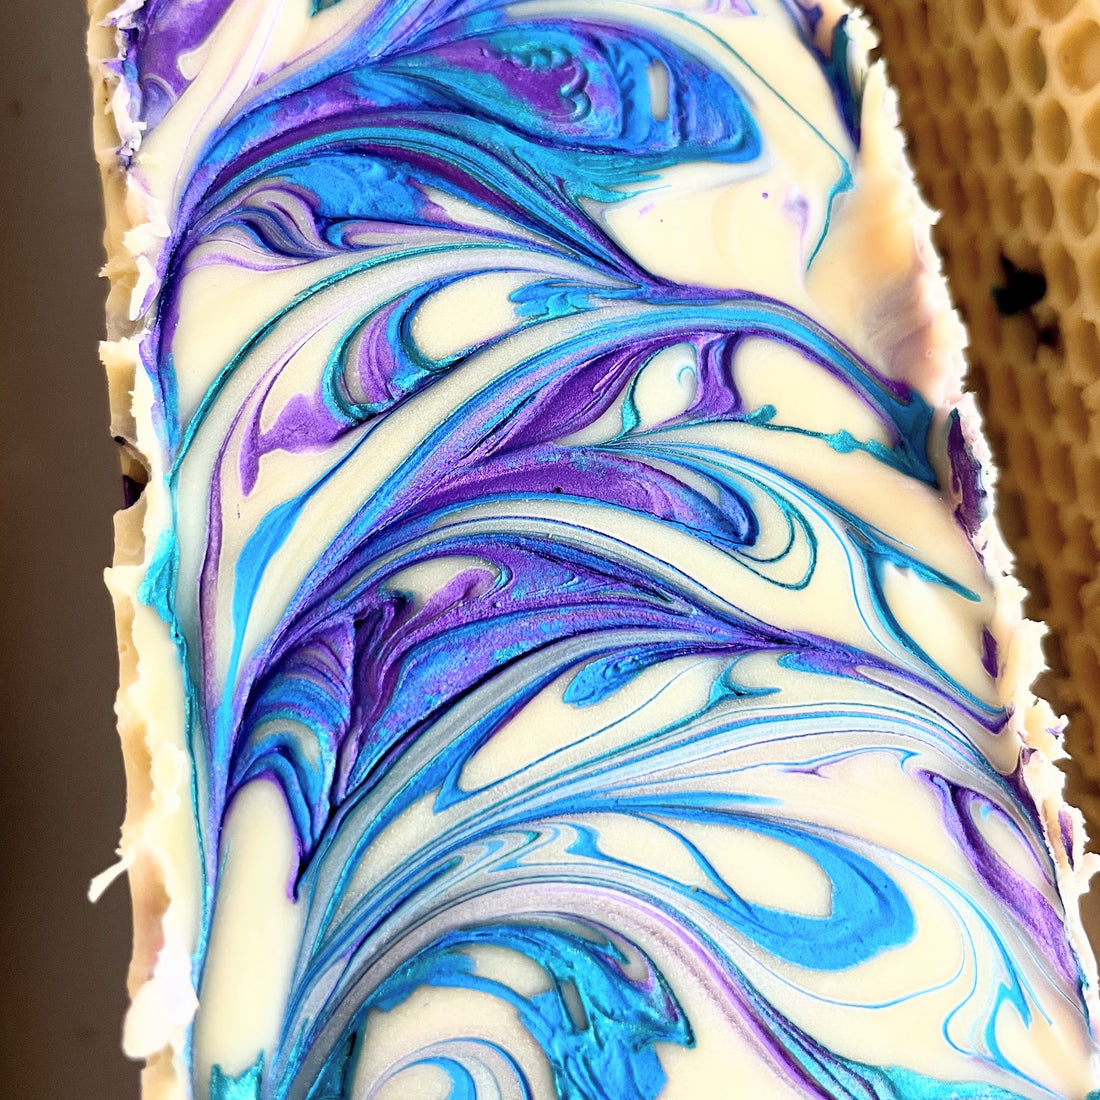 Natural rosemary honey soap. Handcrafted with lovely mica swirls of purple and blue.